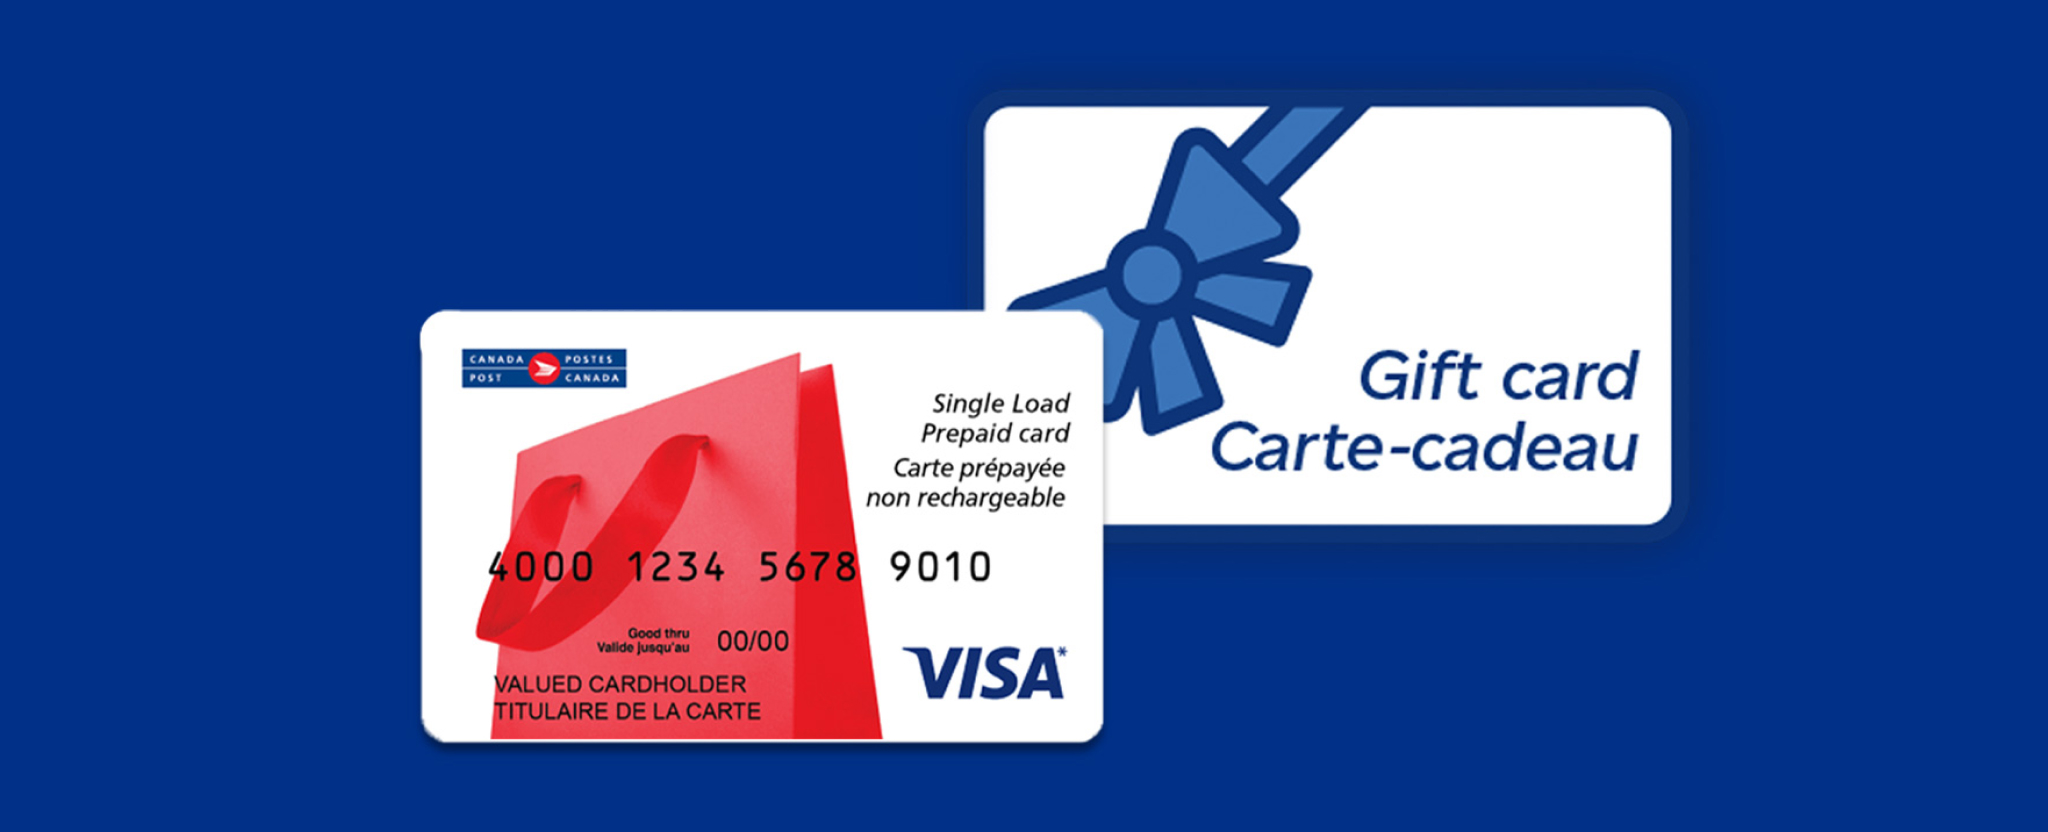 A gift card with an image of a blue bow on it and a Single Load Canada Post Visa Prepaid Card.